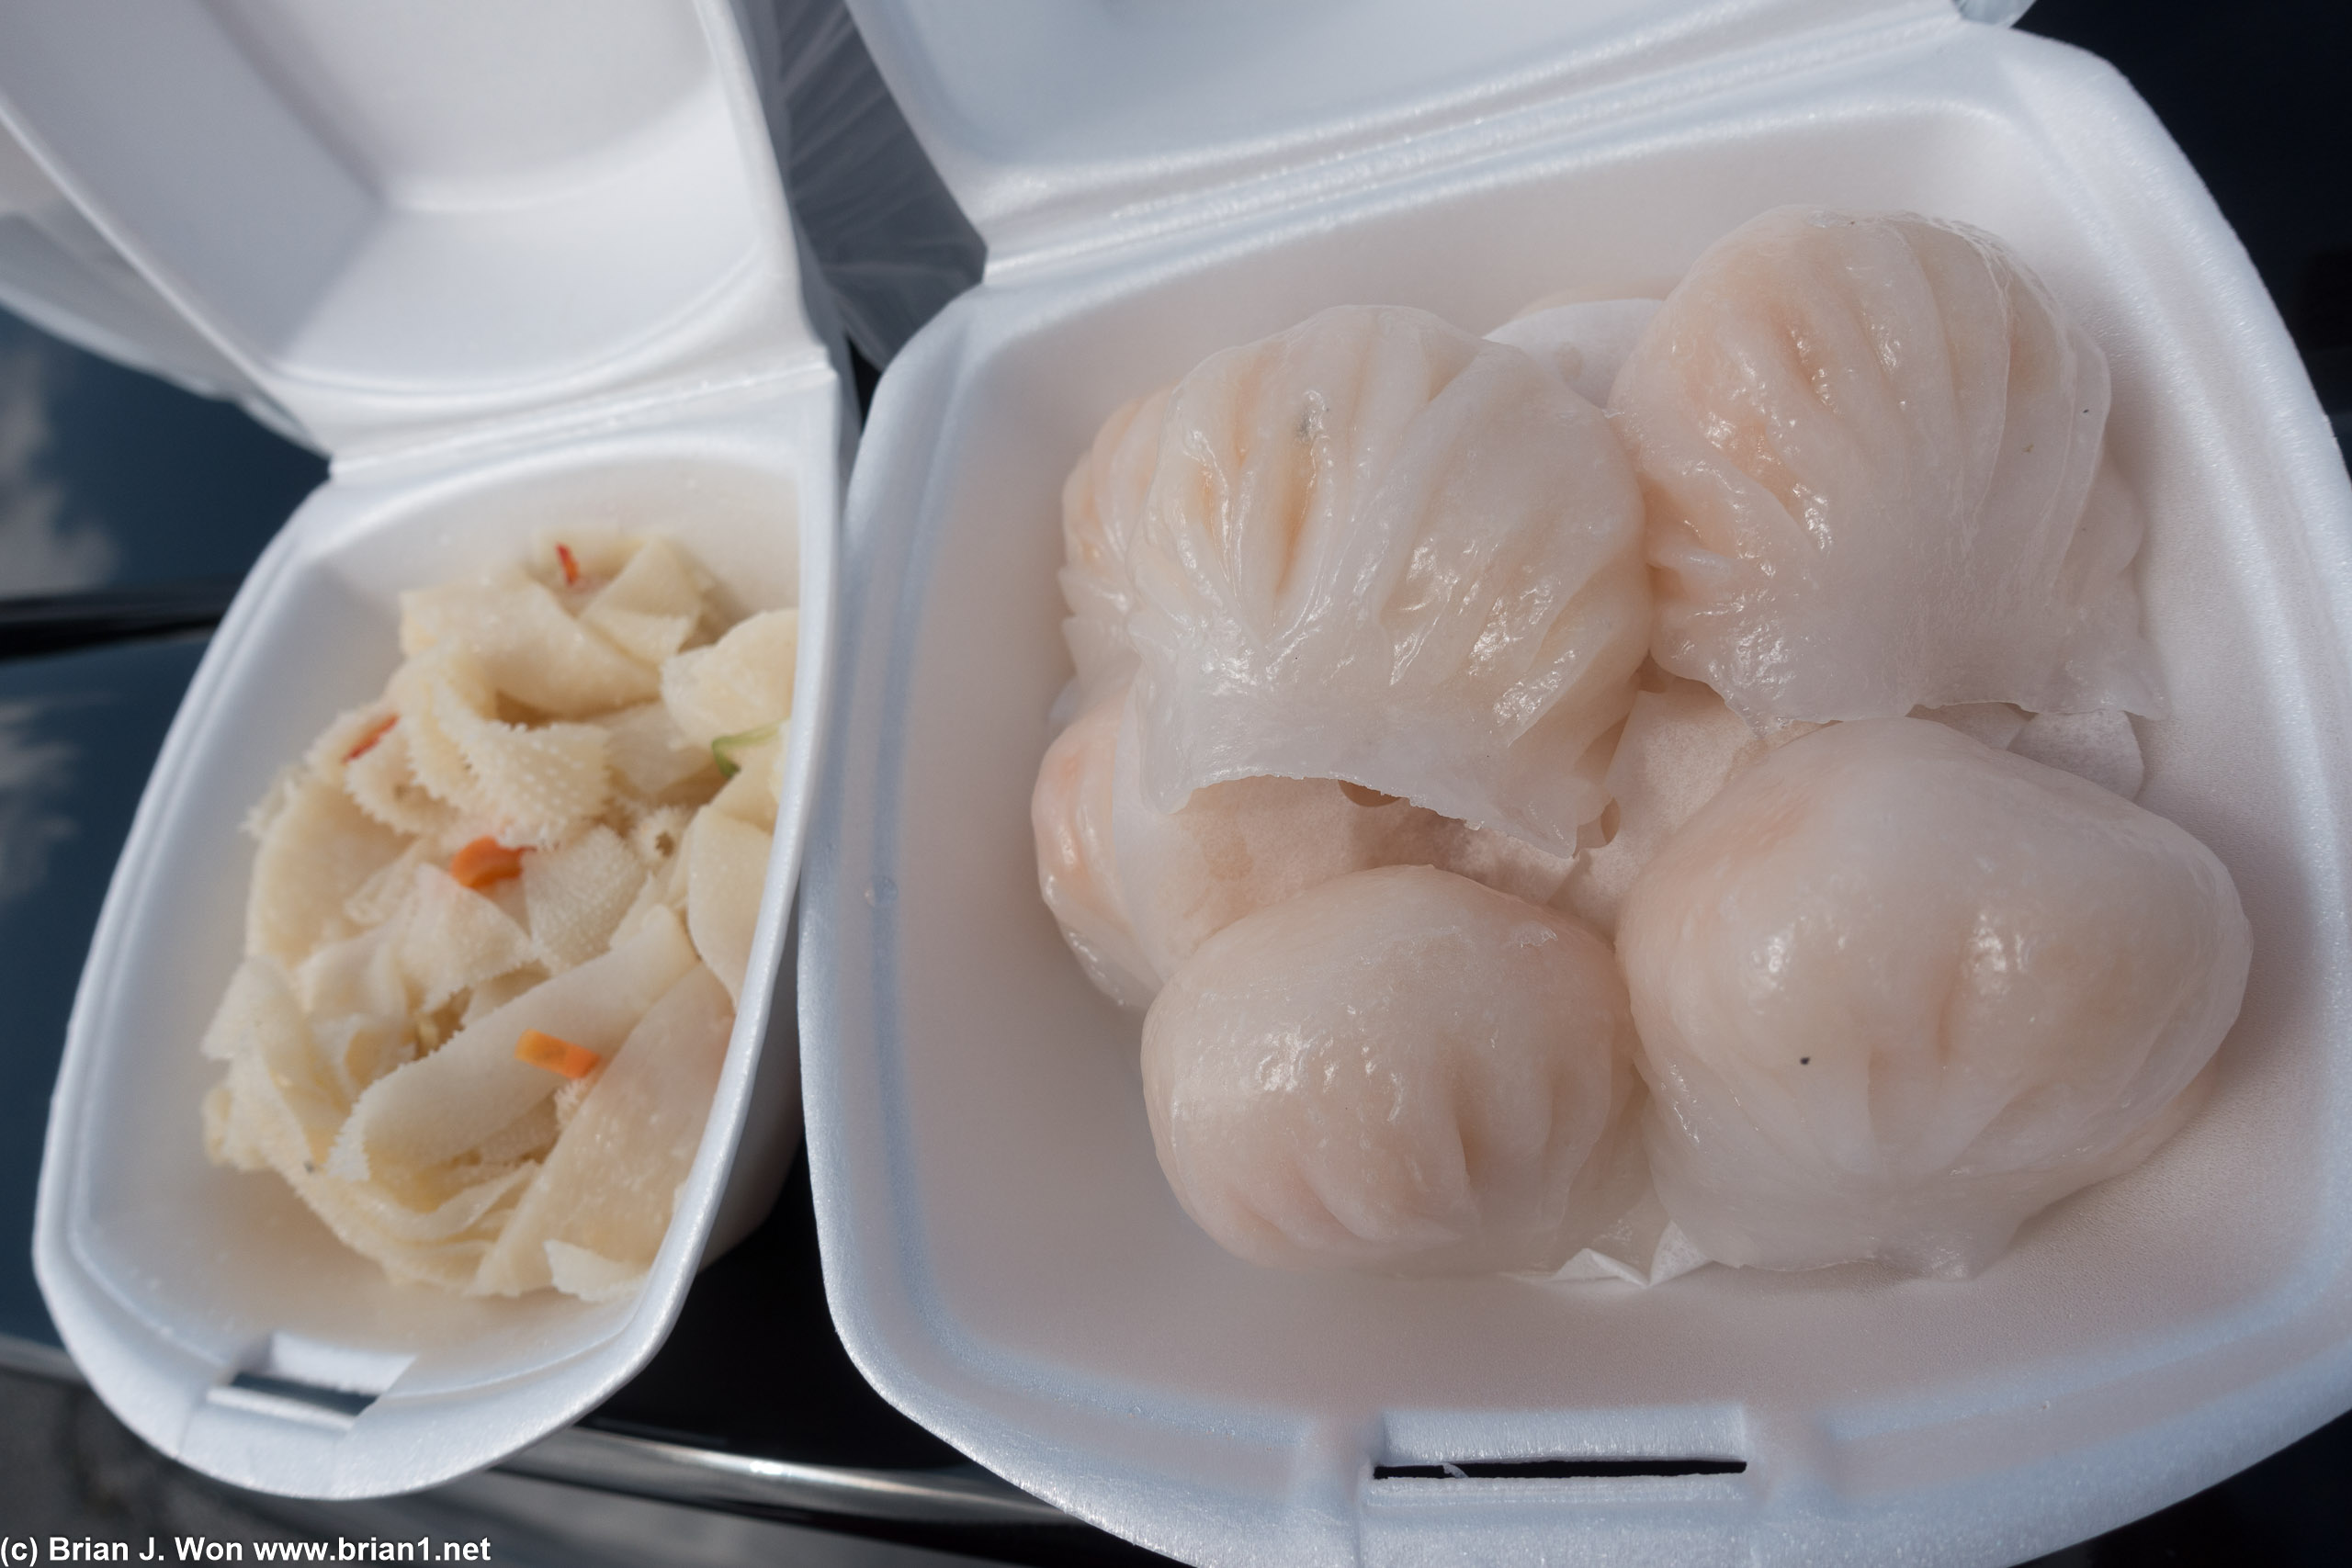 Never has take-out dim sum looked so good.